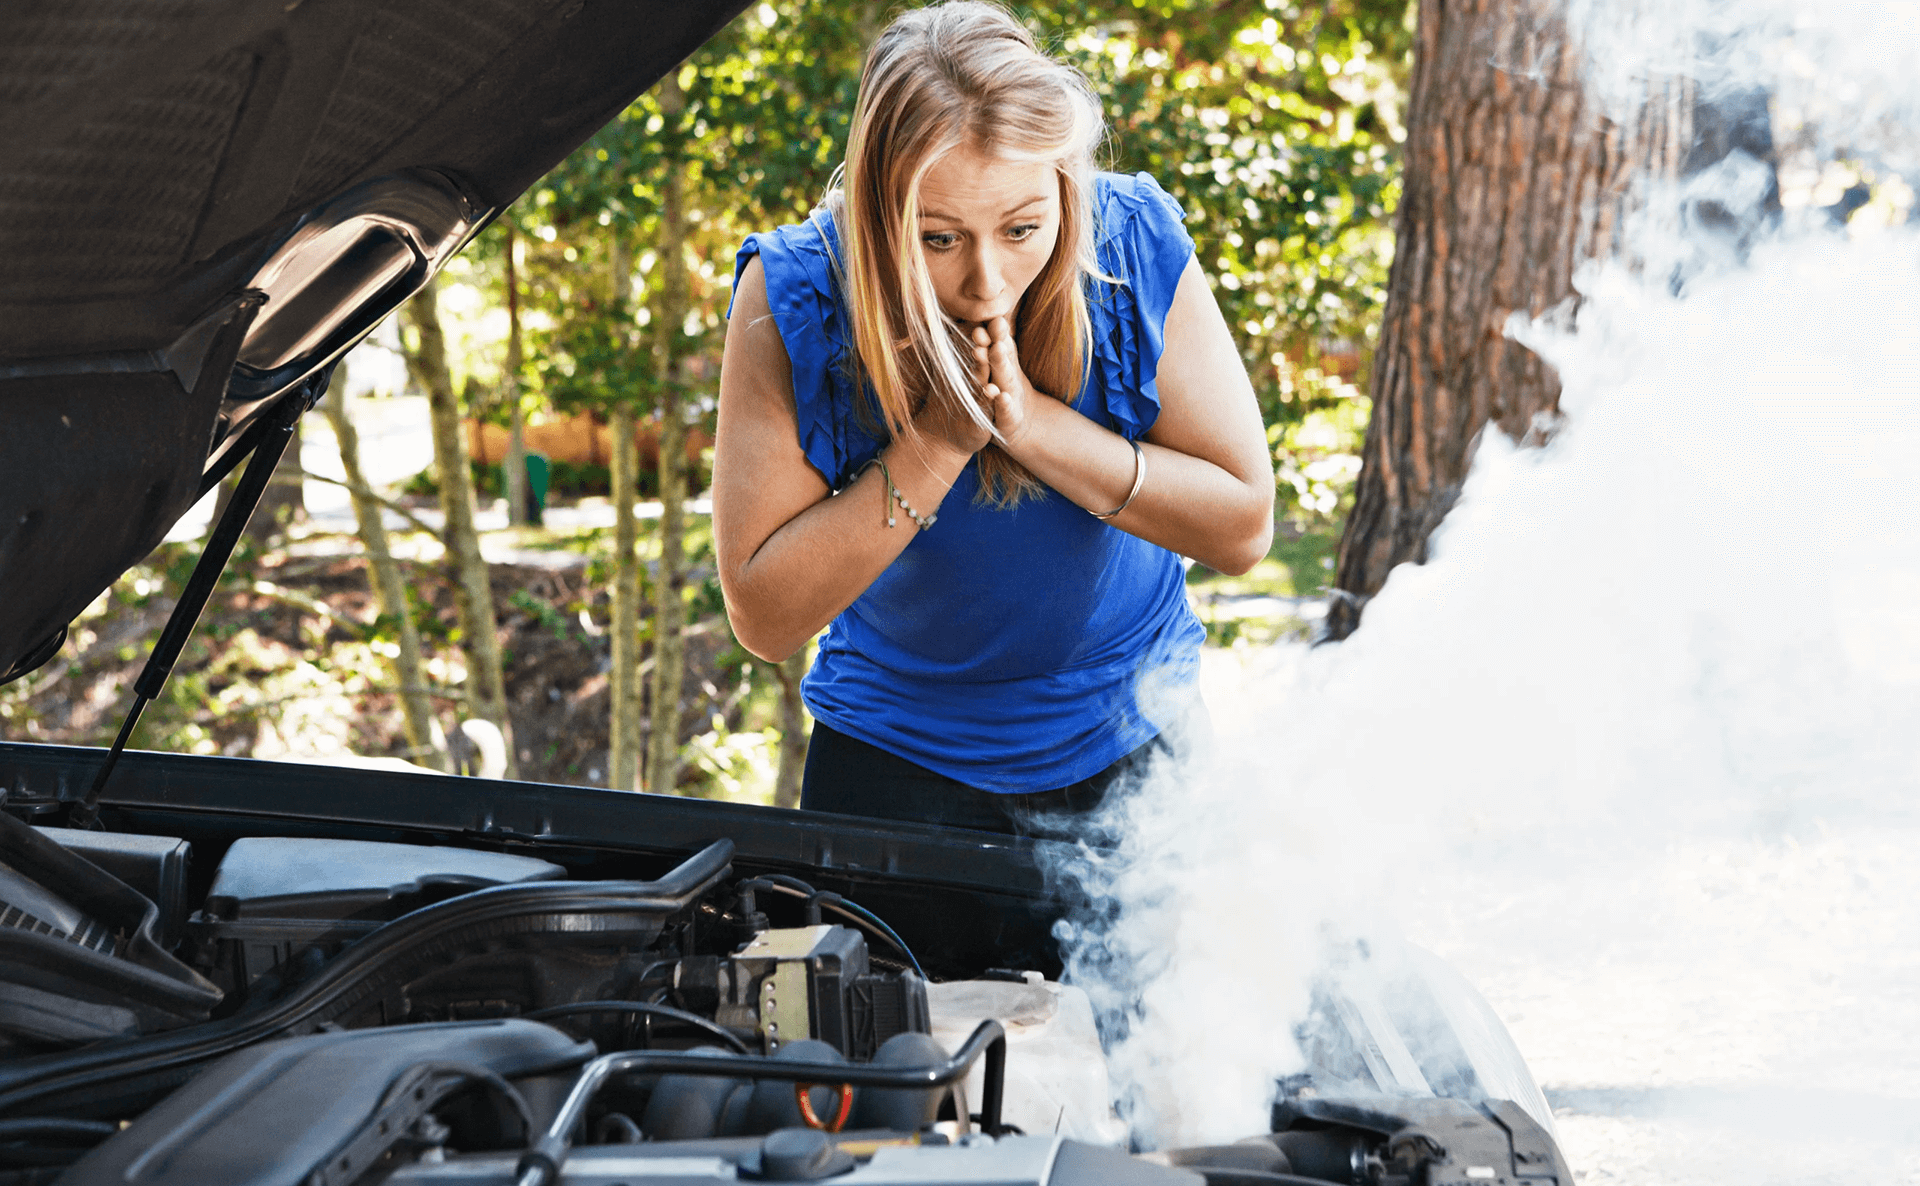 Can a Bad Serpentine Belt Affect Other Parts of Your Car's